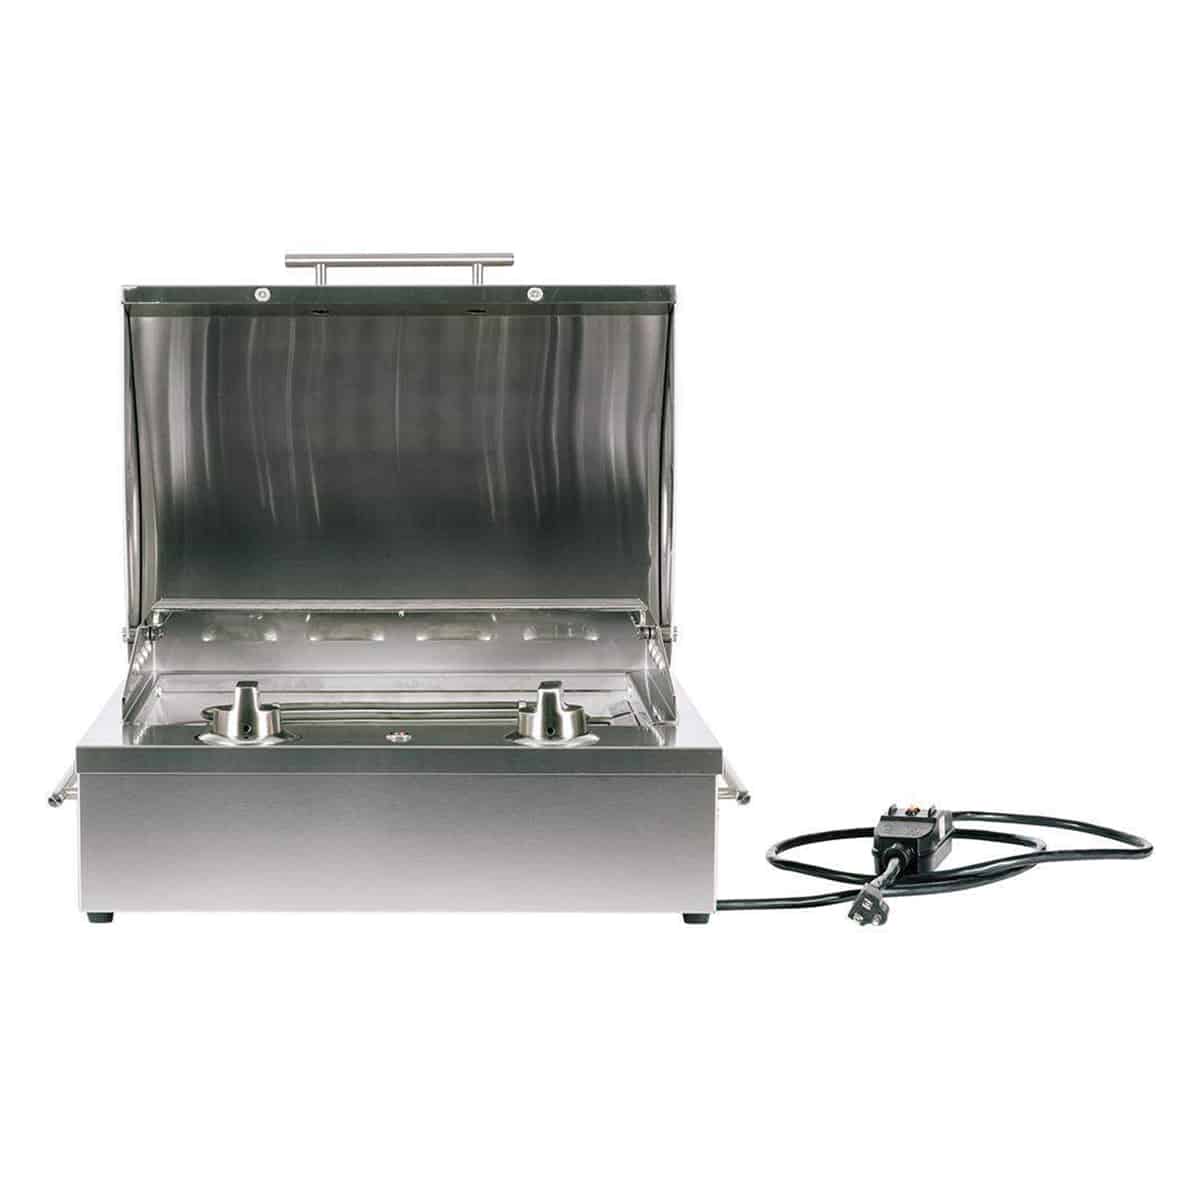 Coyote Single Burner 120V Electric Grill Open Cover with Cable